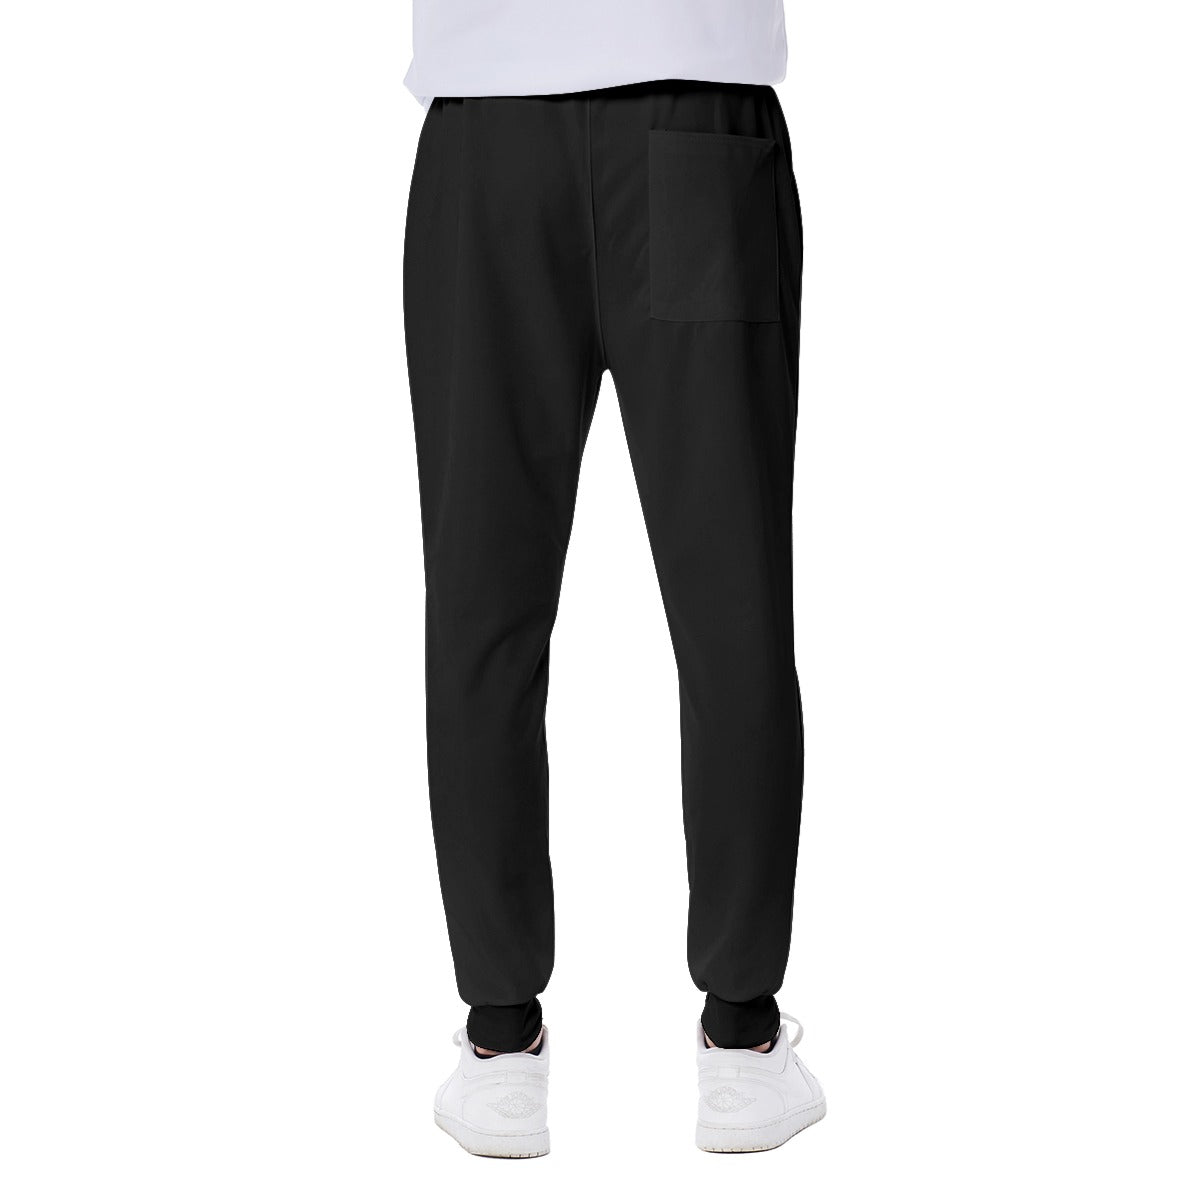 All-Over Print Men's Sweatpants – Ursus Rex Clothing and shoes